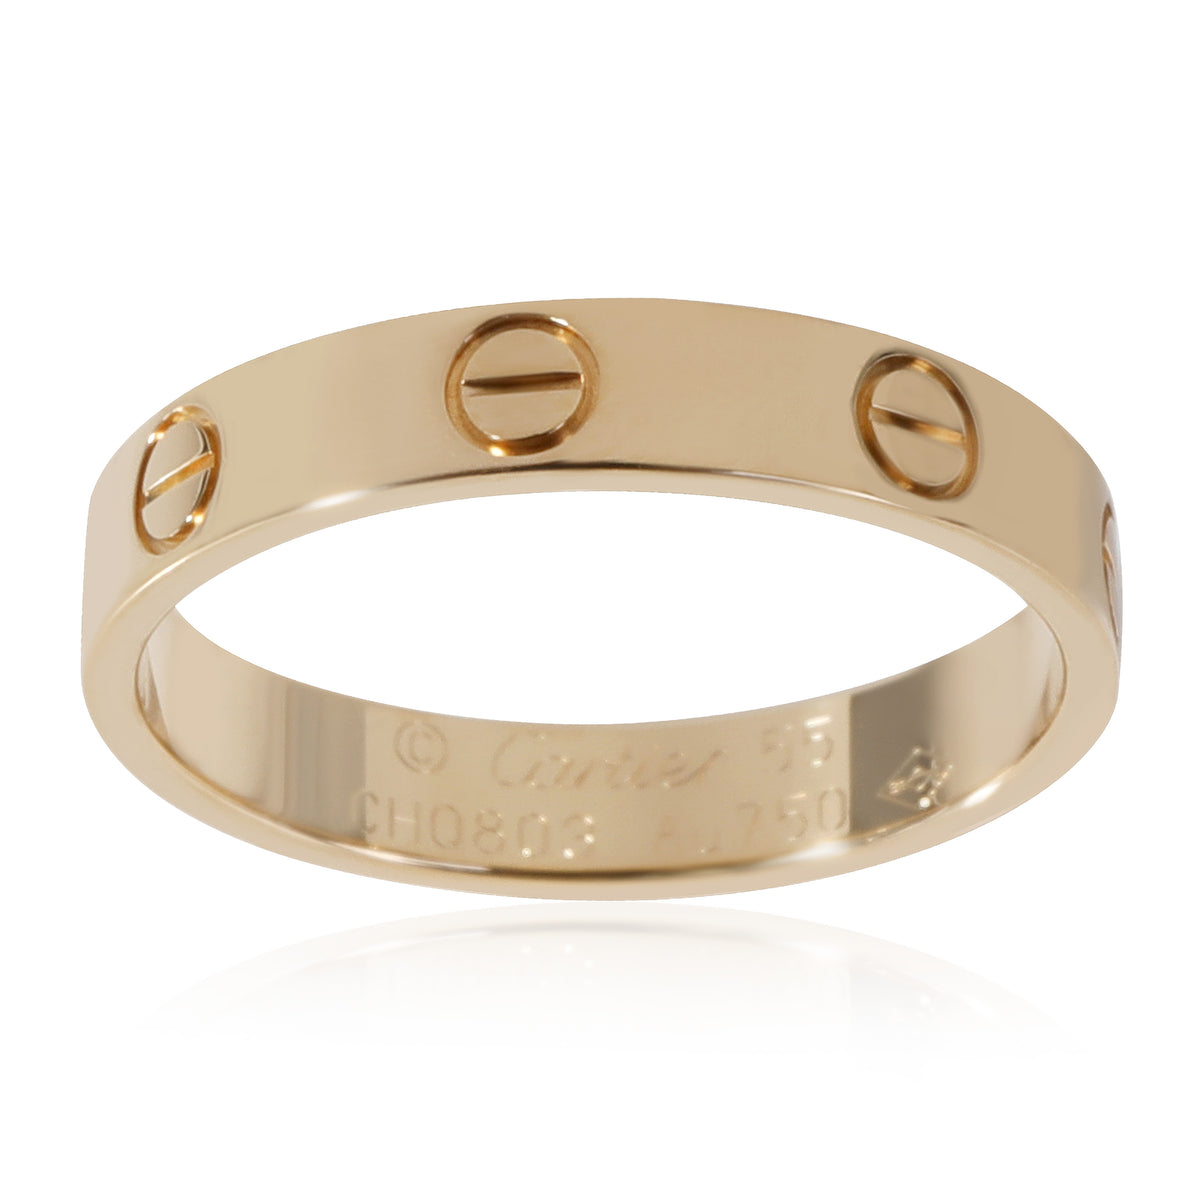 Cartier Love Wedding Band in 18k Yellow Gold